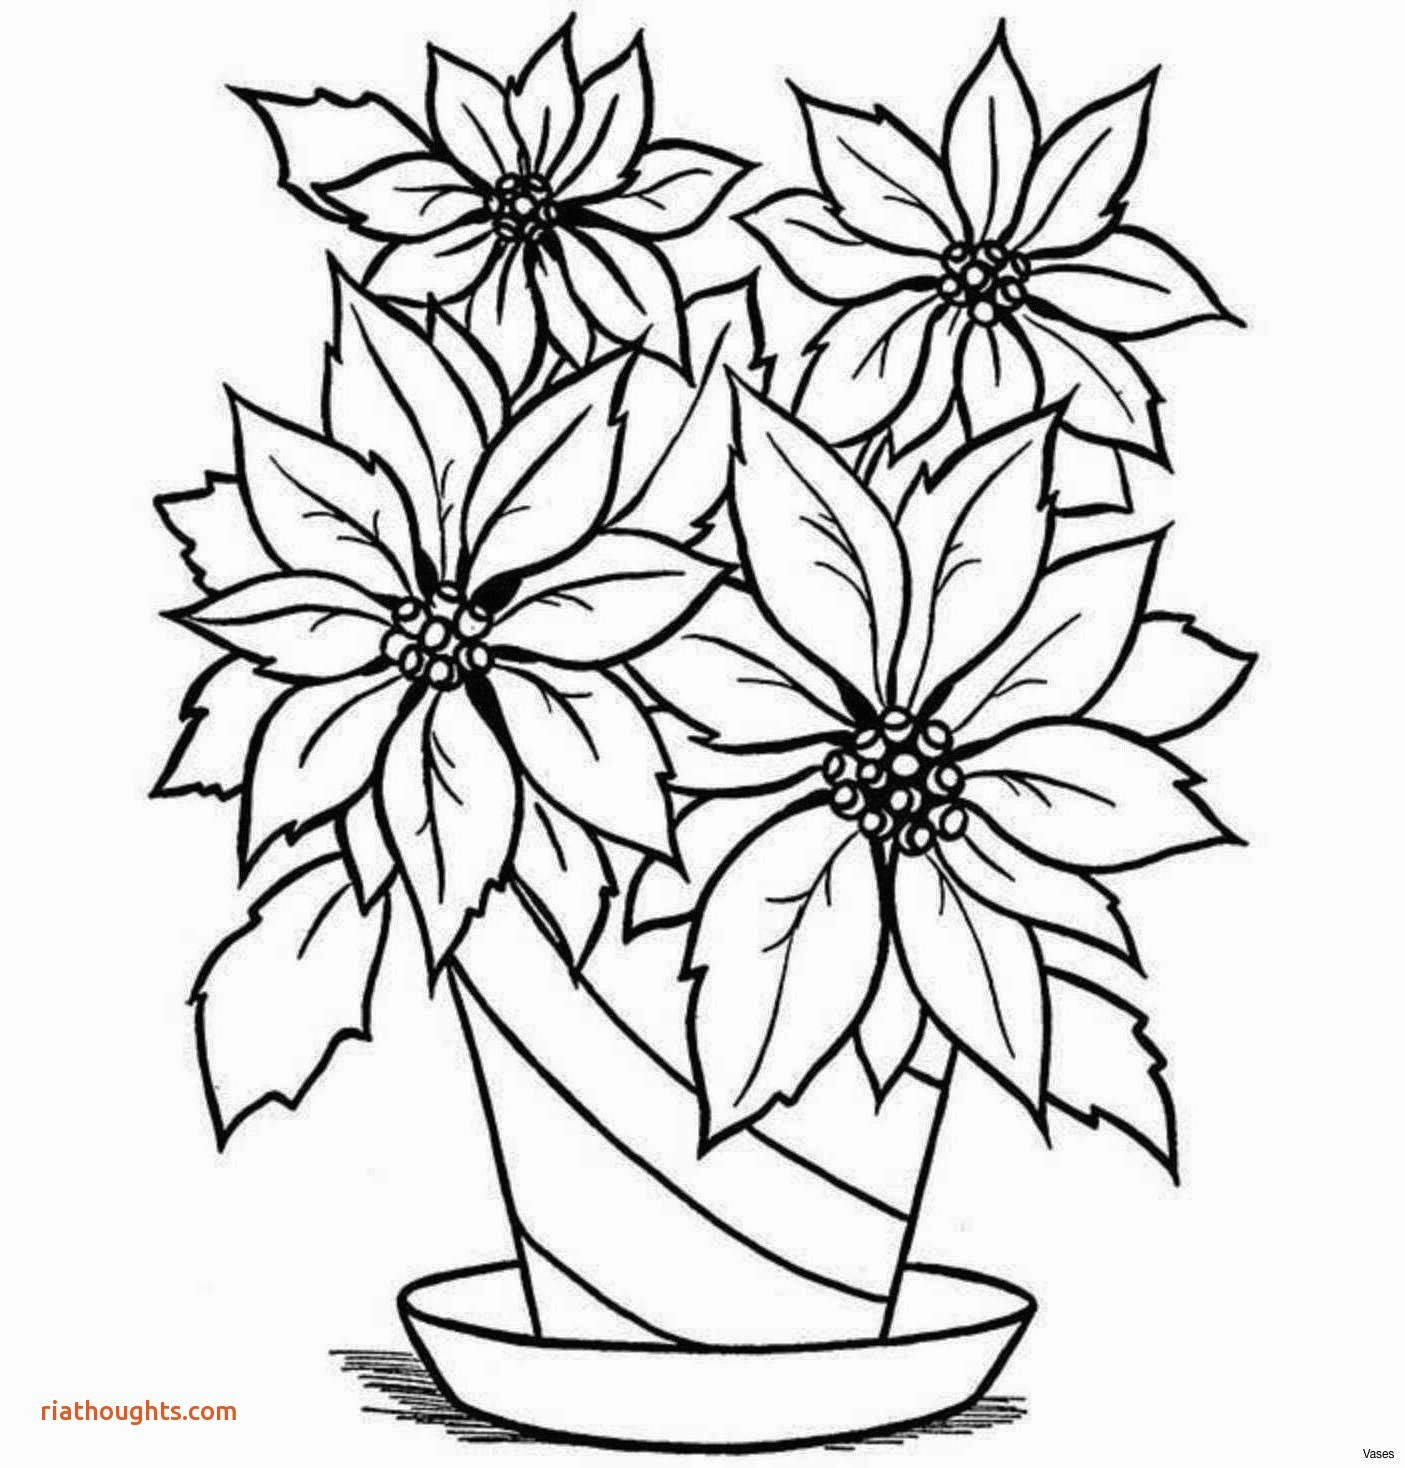 Sunflowers Drawing Easy Elegant Cool Drawings for Kids Step by Step Www Pantry Magic Com